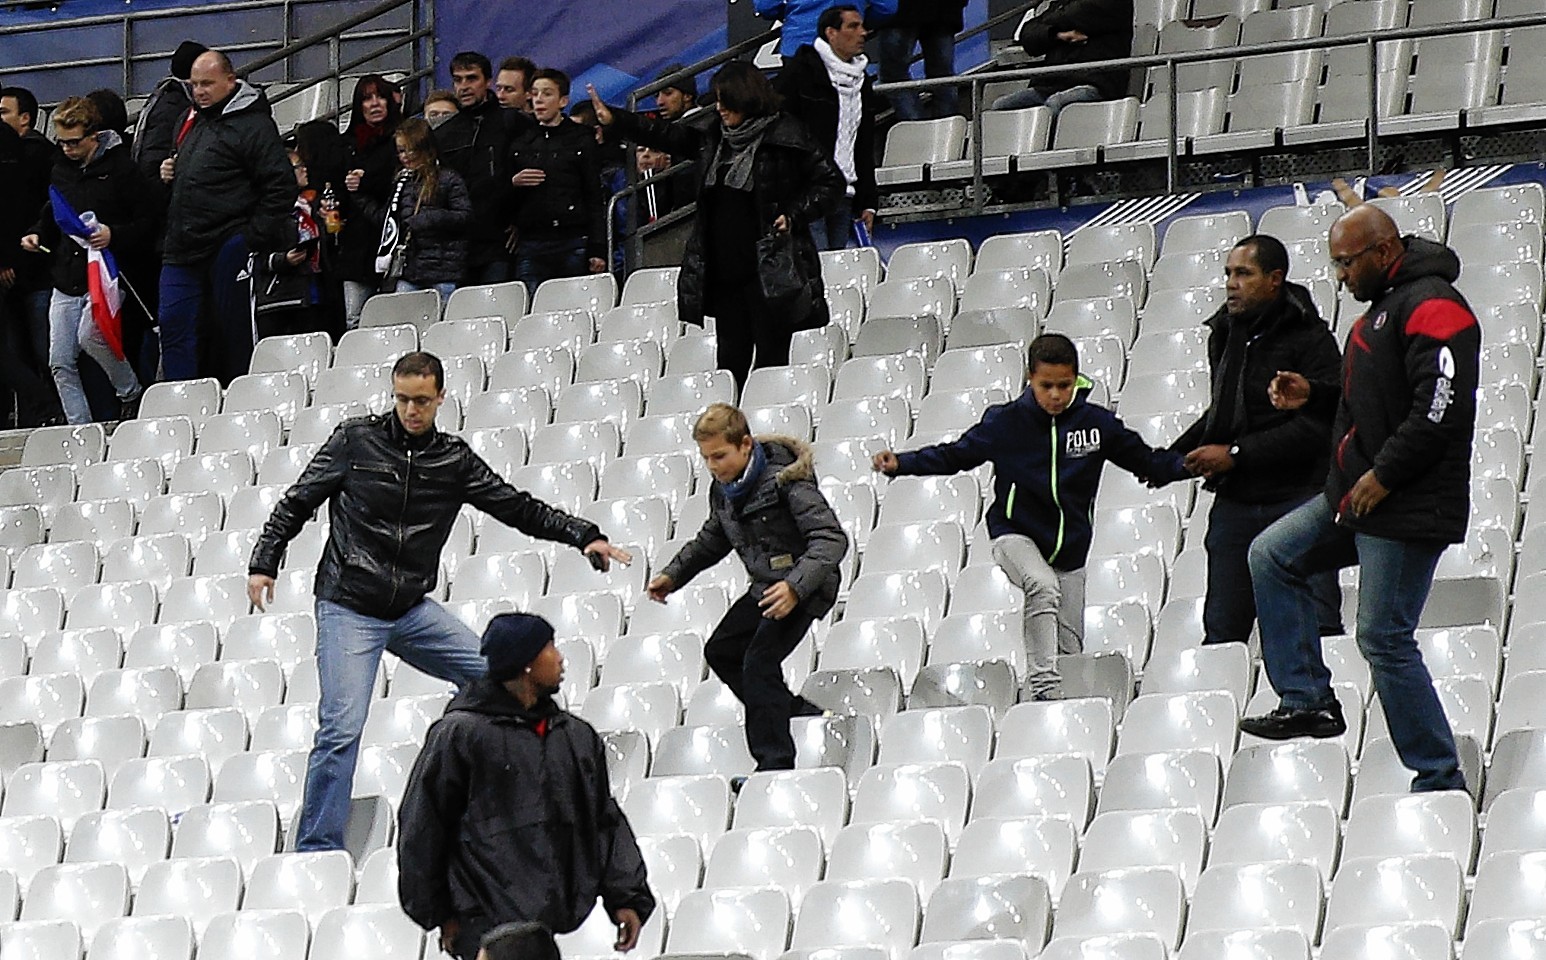 Fans make their way out of the Stade de France